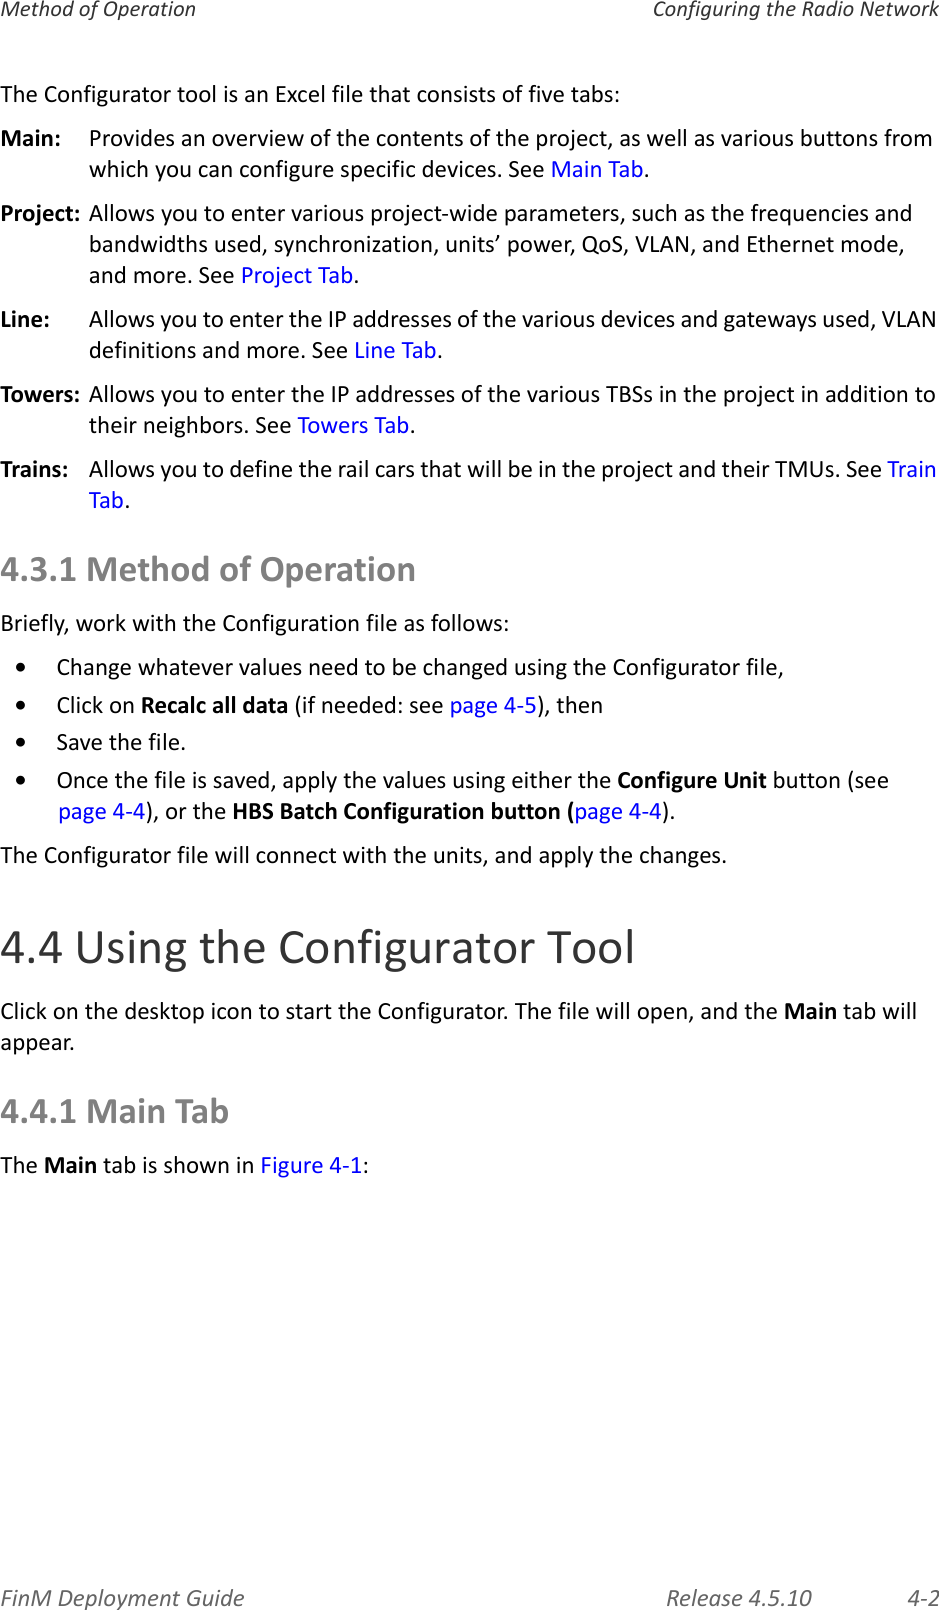 FinMDeploymentGuide Release4.5.10 4‐2MethodofOperation ConfiguringtheRadioNetworkTheConfiguratortoolisanExcelfilethatconsistsoffivetabs:Main: Providesanoverviewofthecontentsoftheproject,aswellasvariousbuttonsfromwhichyoucanconfigurespecificdevices.SeeMainTab.Project:Allowsyoutoentervariousproject‐wideparameters,suchasthefrequenciesandbandwidthsused,synchronization,units’power,QoS,VLAN,andEthernetmode,andmore.SeeProjectTab.Line:AllowsyoutoentertheIPaddressesofthevariousdevicesandgatewaysused,VLANdefinitionsandmore.SeeLineTab.Towers: AllowsyoutoentertheIPaddressesofthevariousTBSsintheprojectinadditiontotheirneighbors.SeeTowersTab.Trains:AllowsyoutodefinetherailcarsthatwillbeintheprojectandtheirTMUs.SeeTrainTab.4.3.1MethodofOperationBriefly,workwiththeConfigurationfileasfollows:•ChangewhatevervaluesneedtobechangedusingtheConfiguratorfile,•ClickonRecalcalldata(ifneeded:seepage 4‐5),then•Savethefile.•Oncethefileissaved,applythevaluesusingeithertheConfigureUnitbutton(seepage 4‐4),ortheHBSBatchConfigurationbutton(page 4‐4).TheConfiguratorfilewillconnectwiththeunits,andapplythechanges.4.4UsingtheConfiguratorToolClickonthedesktopicontostarttheConfigurator.Thefilewillopen,andtheMaintabwillappear.4.4.1MainTabTheMaintabisshowninFigure 4‐1: